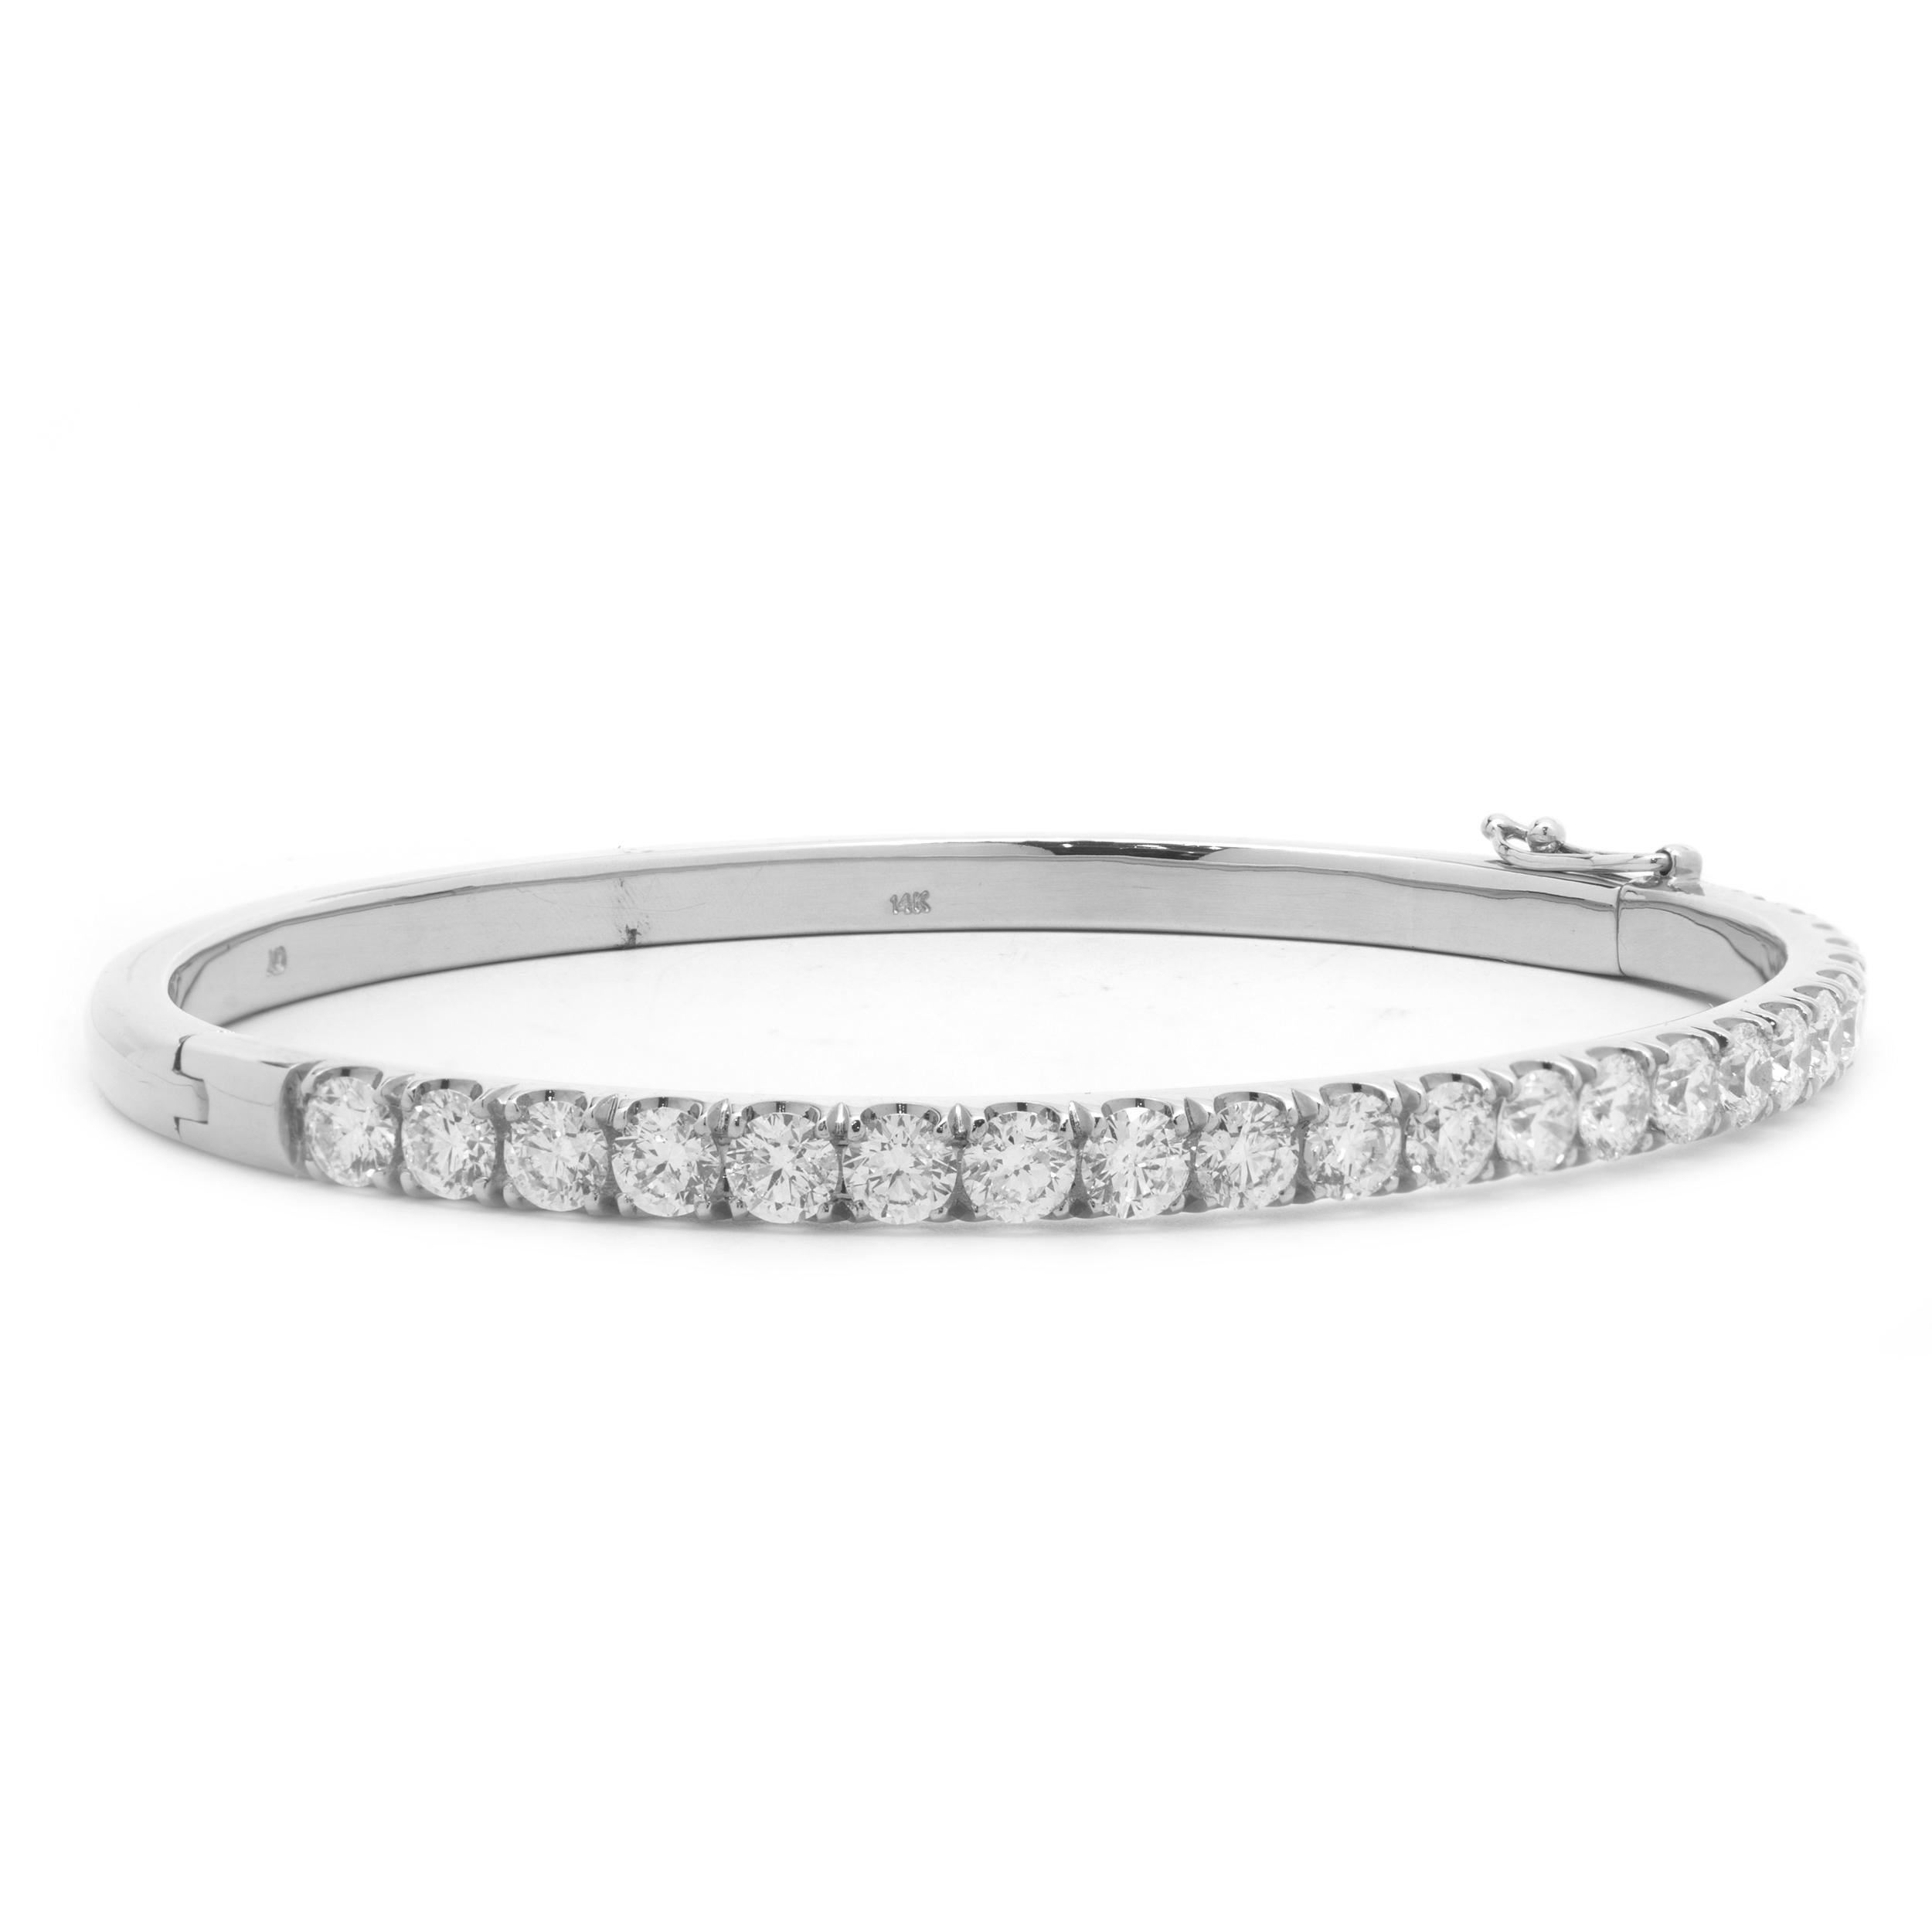 Material: 18K white gold
Diamonds: 21 round brilliant cut = 4.20cttw
Color: G
Clarity: VS2-SI1
Dimensions: bracelet will fit up to a 6.5-inch wrist
Weight: 17.21 grams
